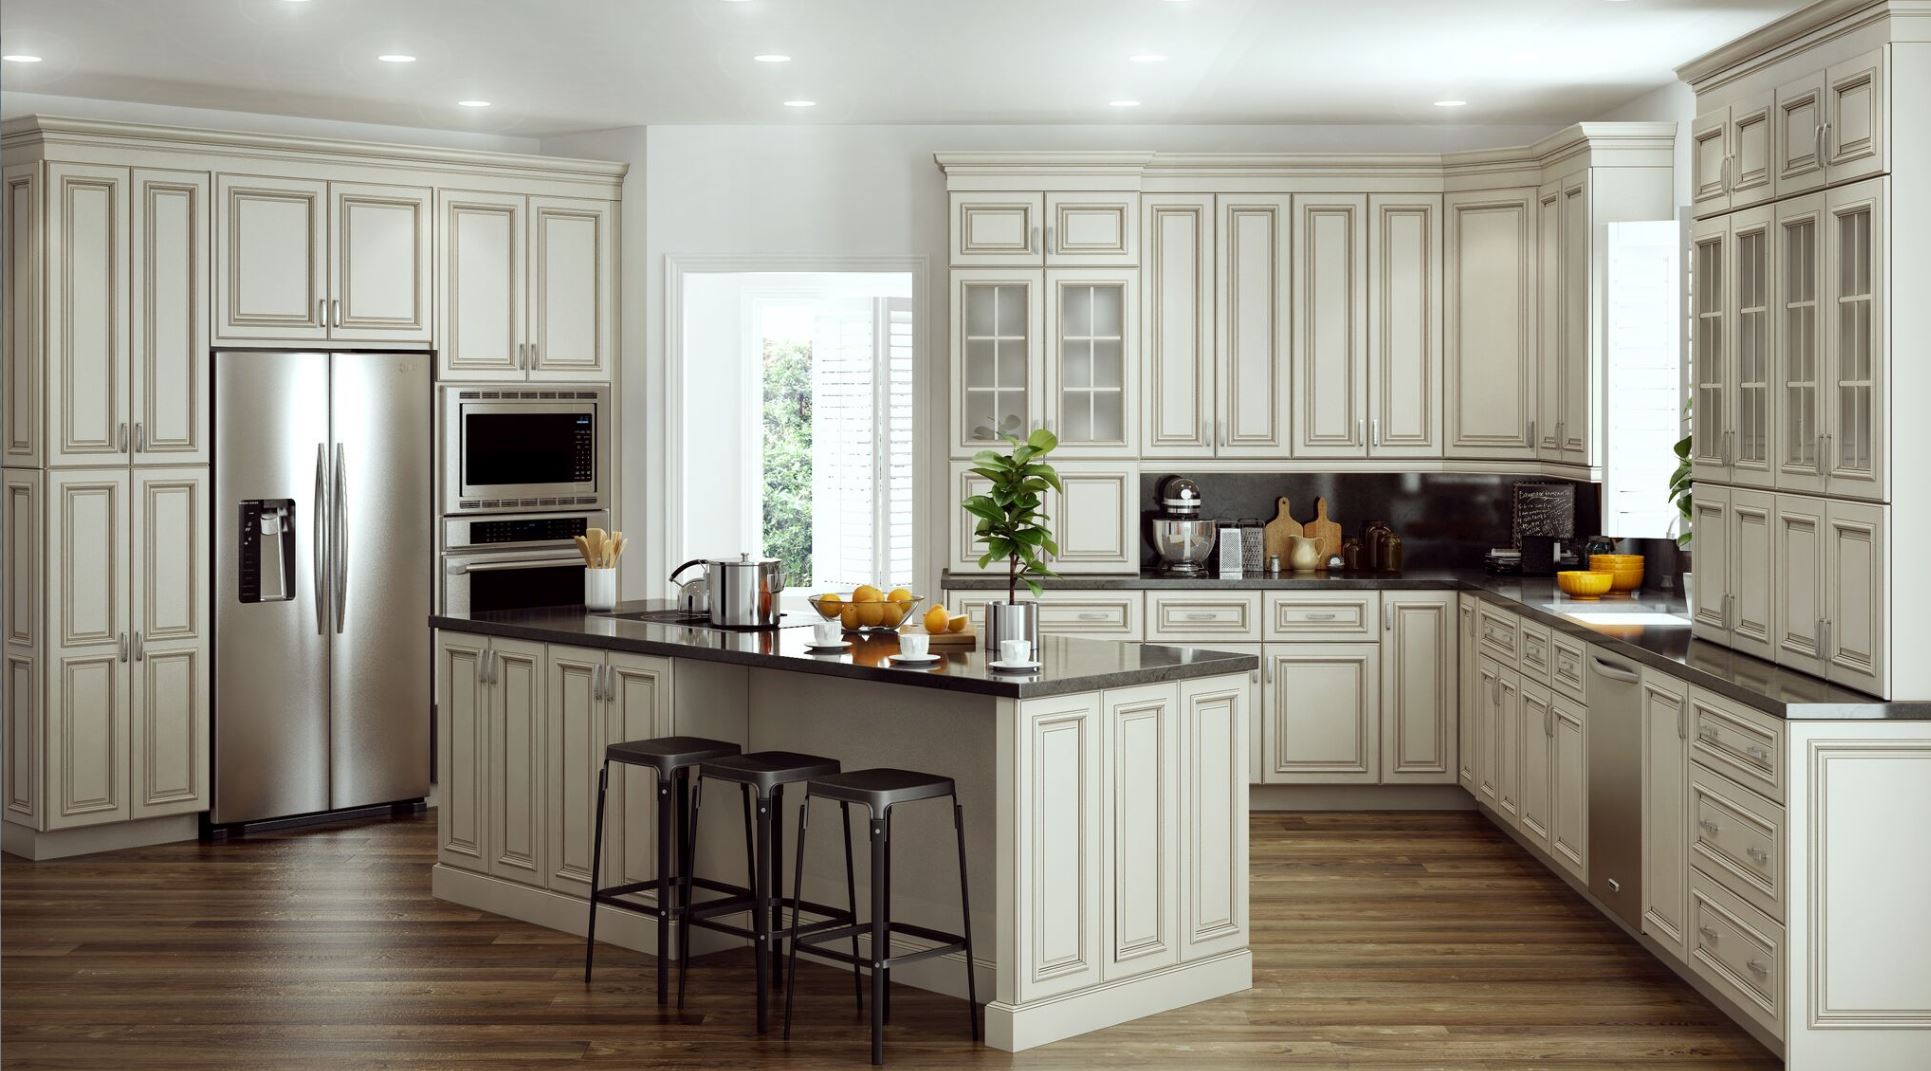 Simple White Kitchen Wall Cabinet Home Depot for Living room